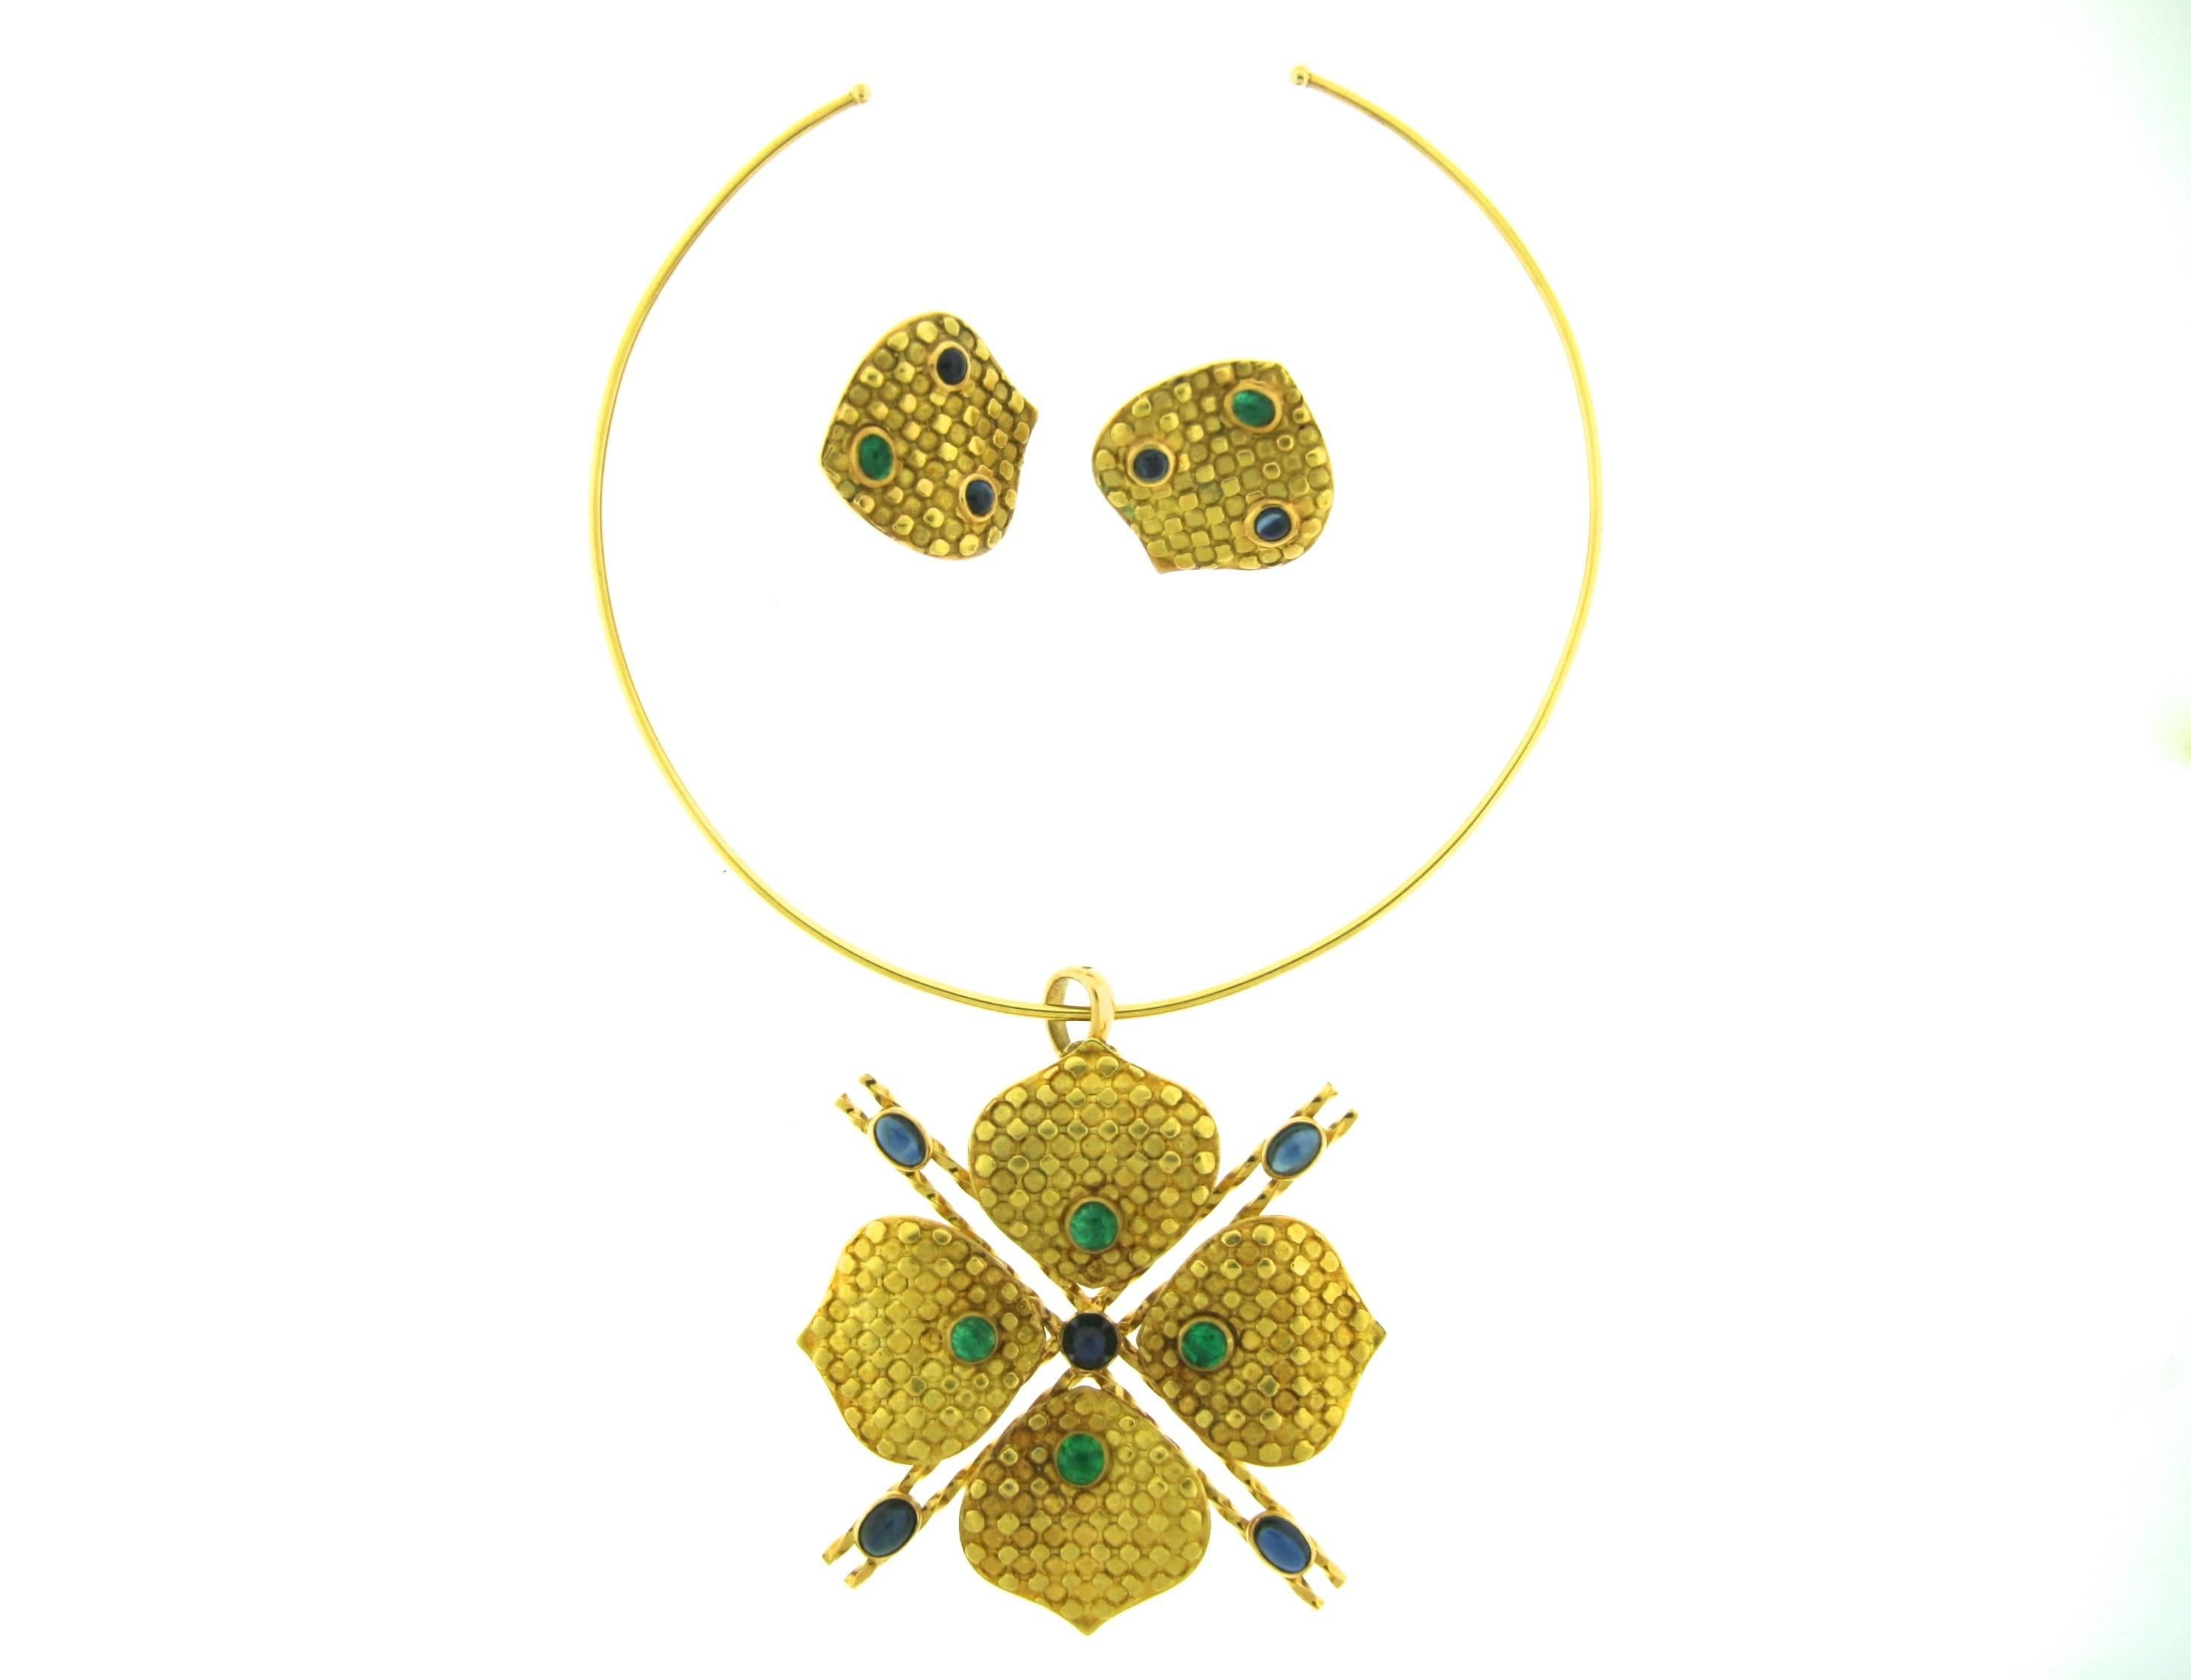 Stylish French 18k gold choker suspending a clover shape pendant with sapphires and emeralds and a matching pair of earclips ensuite. Choker internal circumference is 13